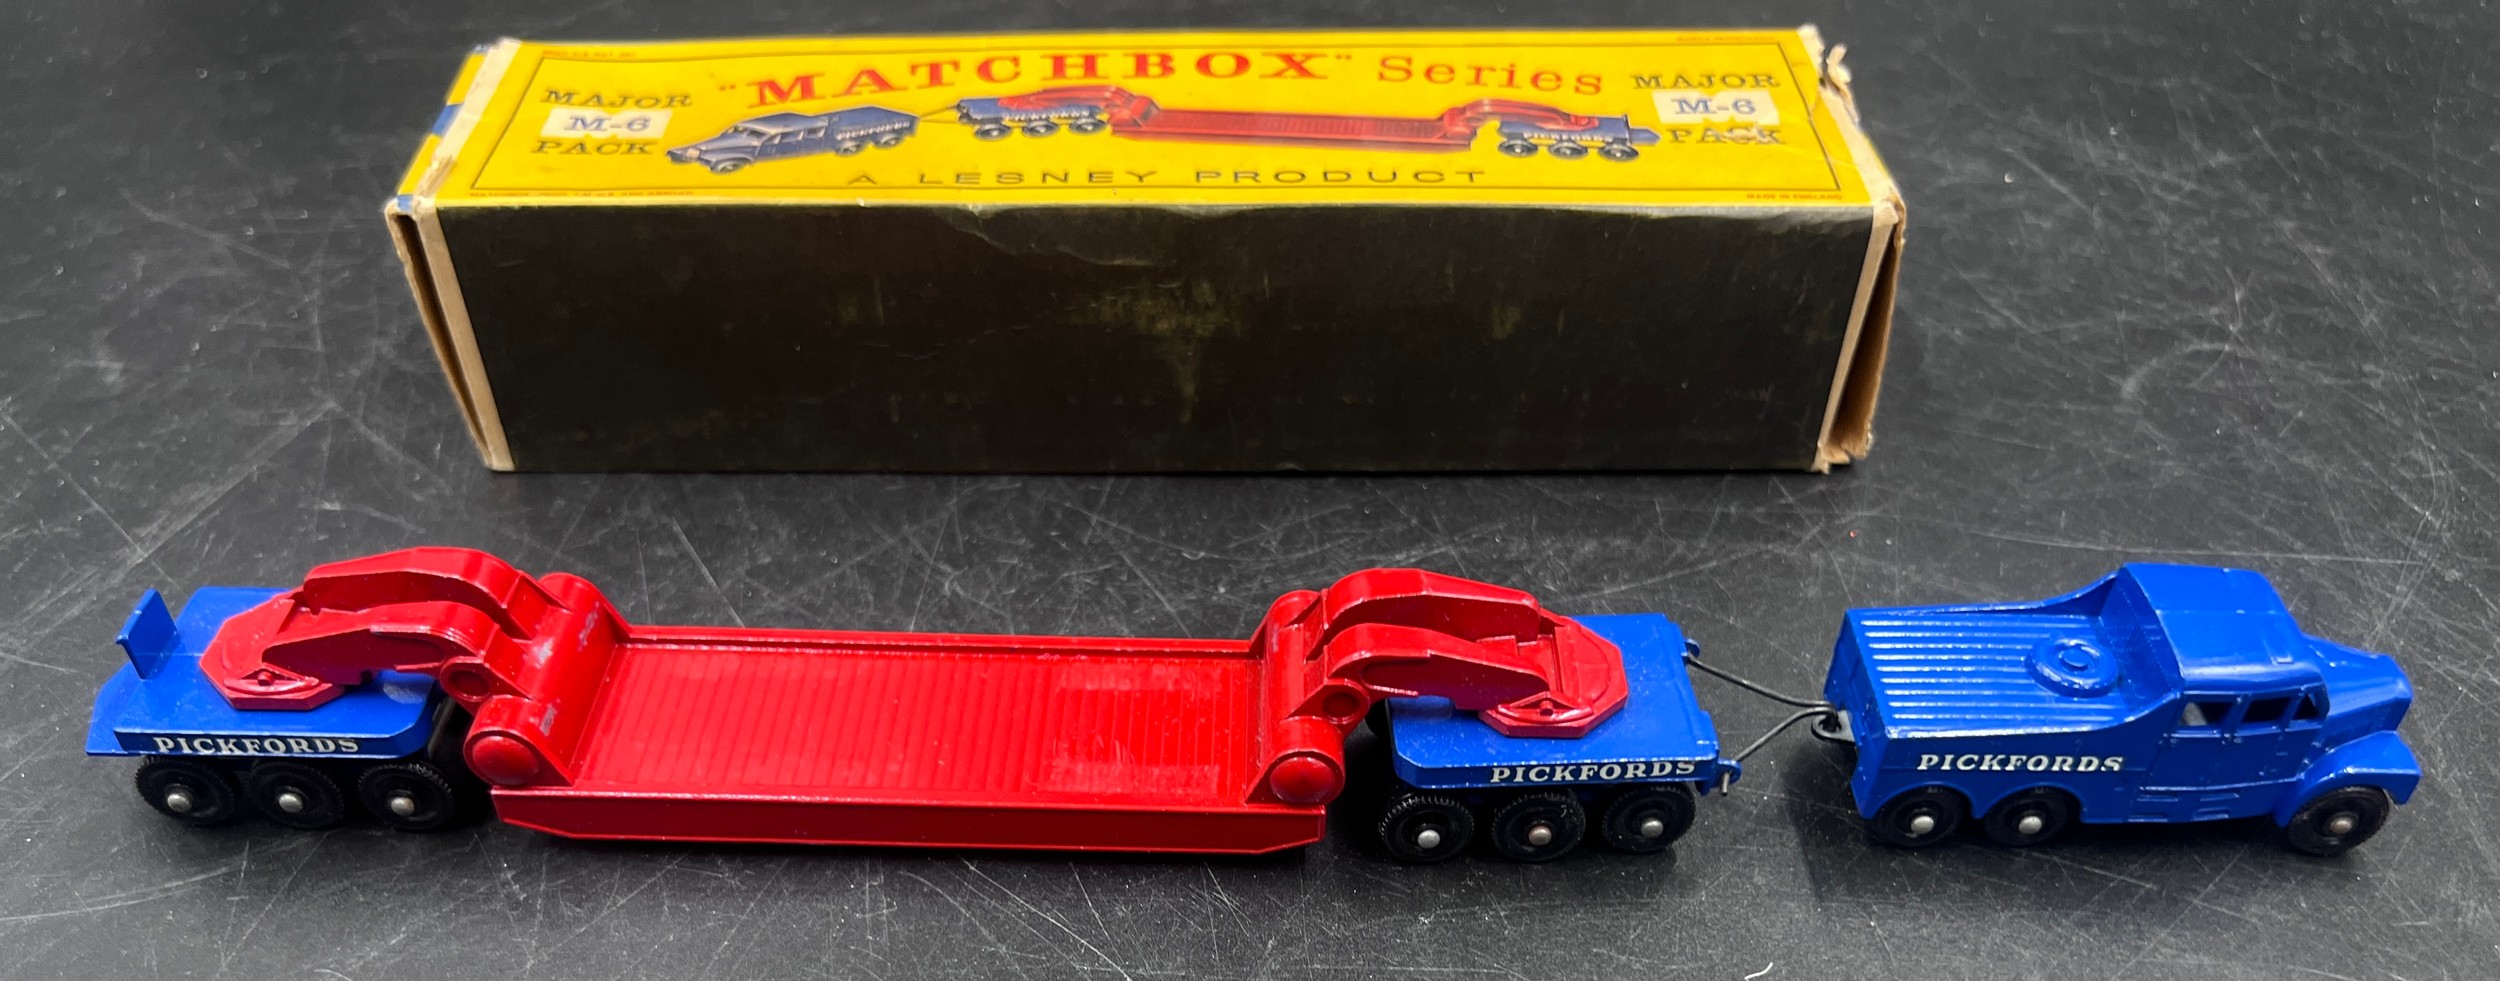 A boxed Lesney 'Matchbox' series M-6 Major pack Pickfords 200 ton transporter, dark blue tractor - Image 3 of 8